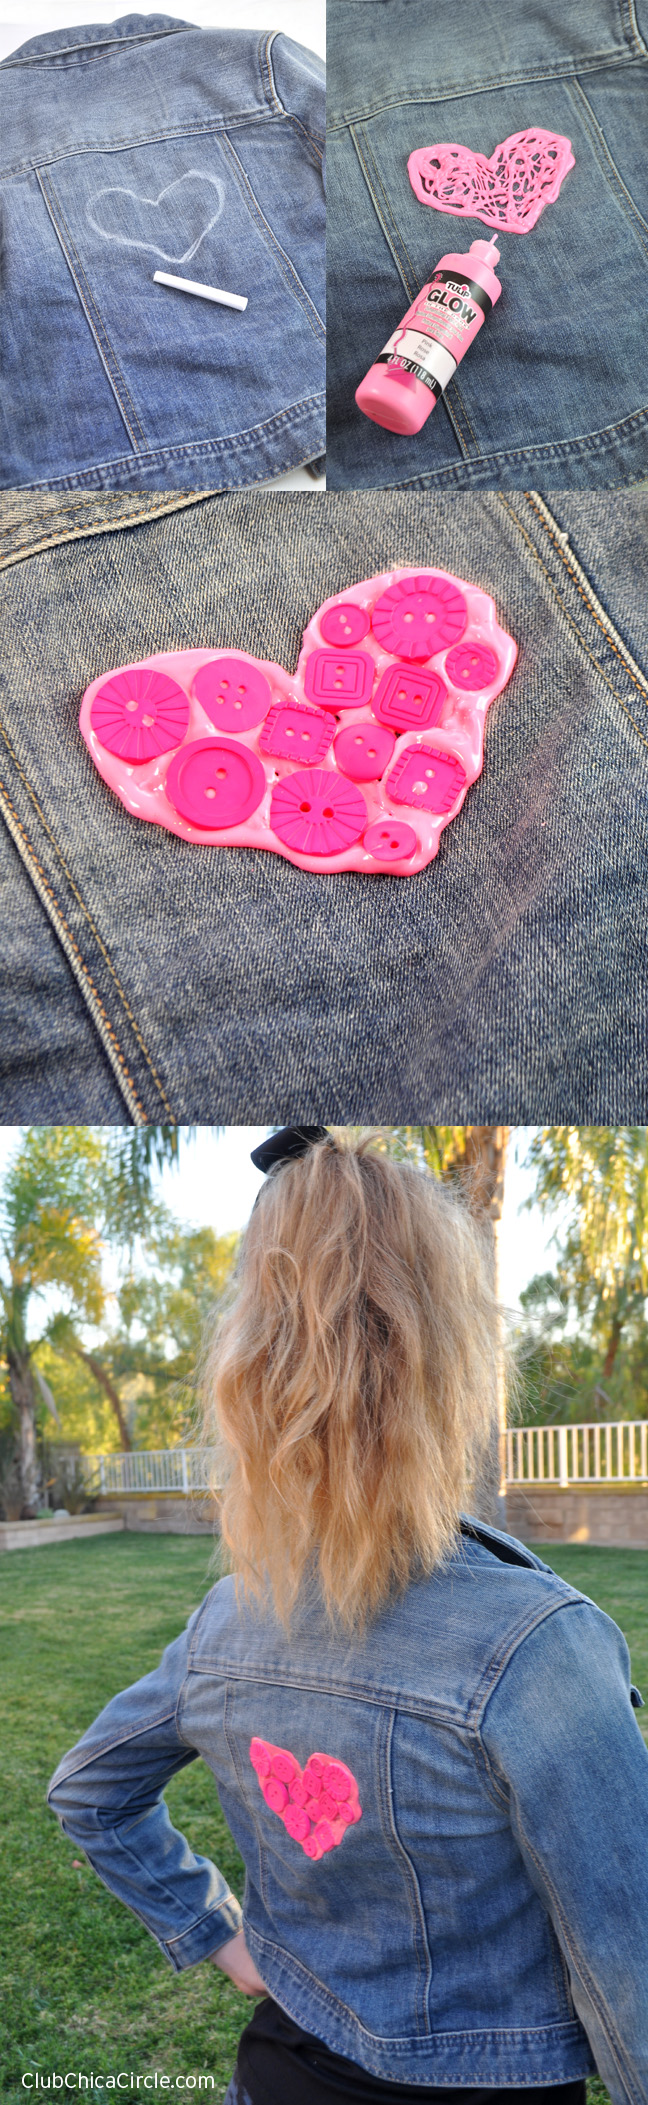 Upcycled Denim Jacket with Buttons and Puffy Paint